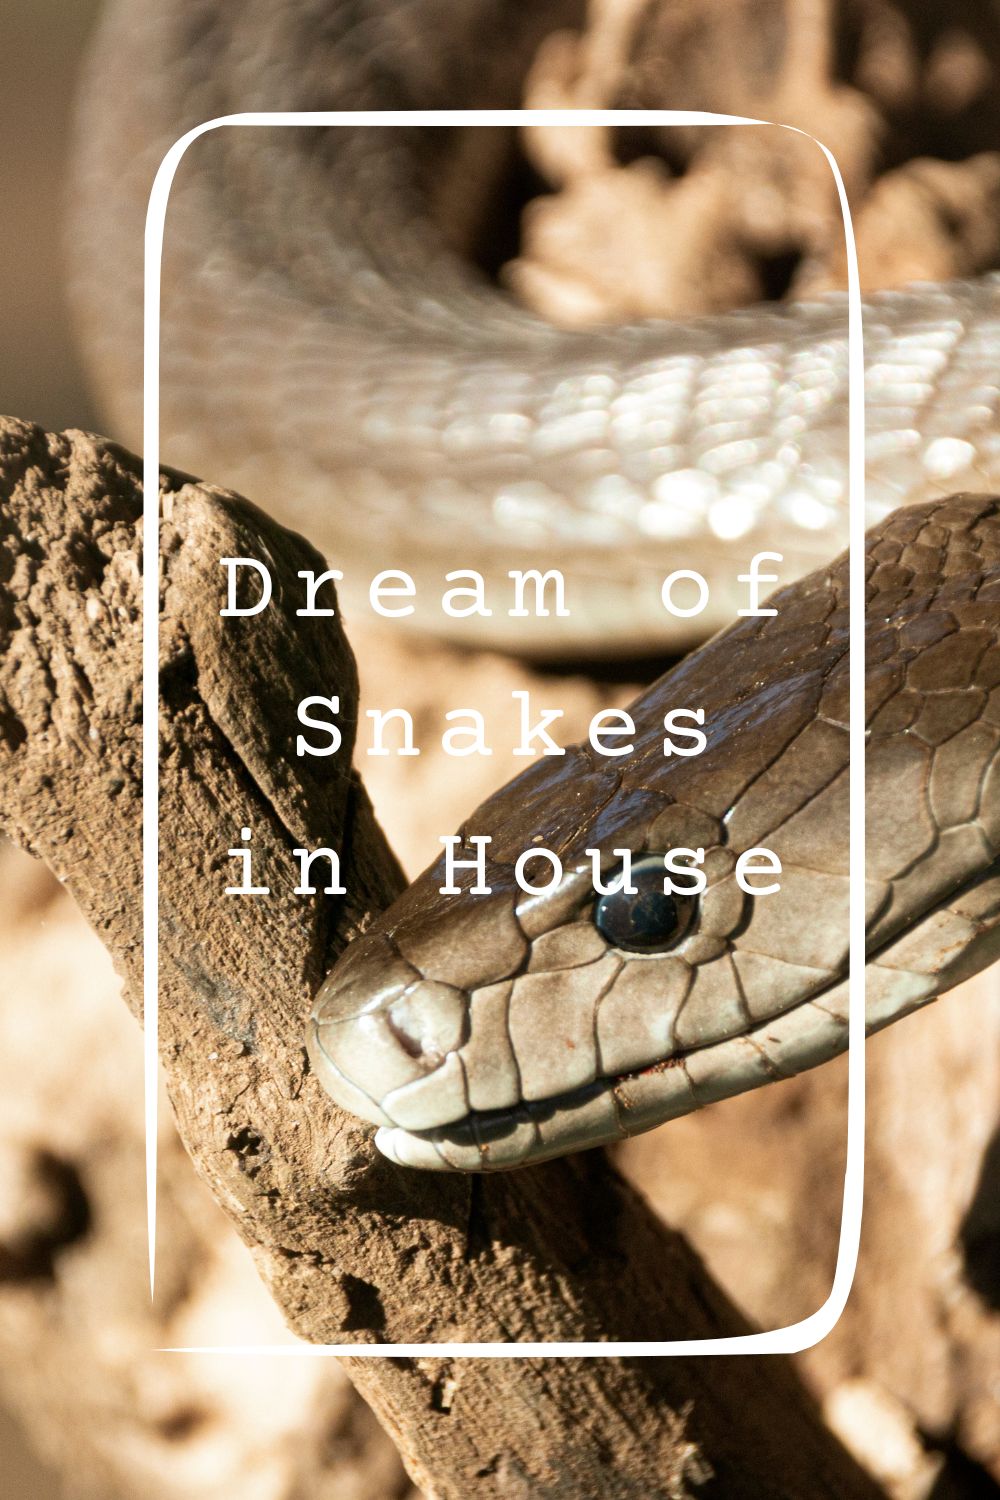 Dream of Snakes in House 4